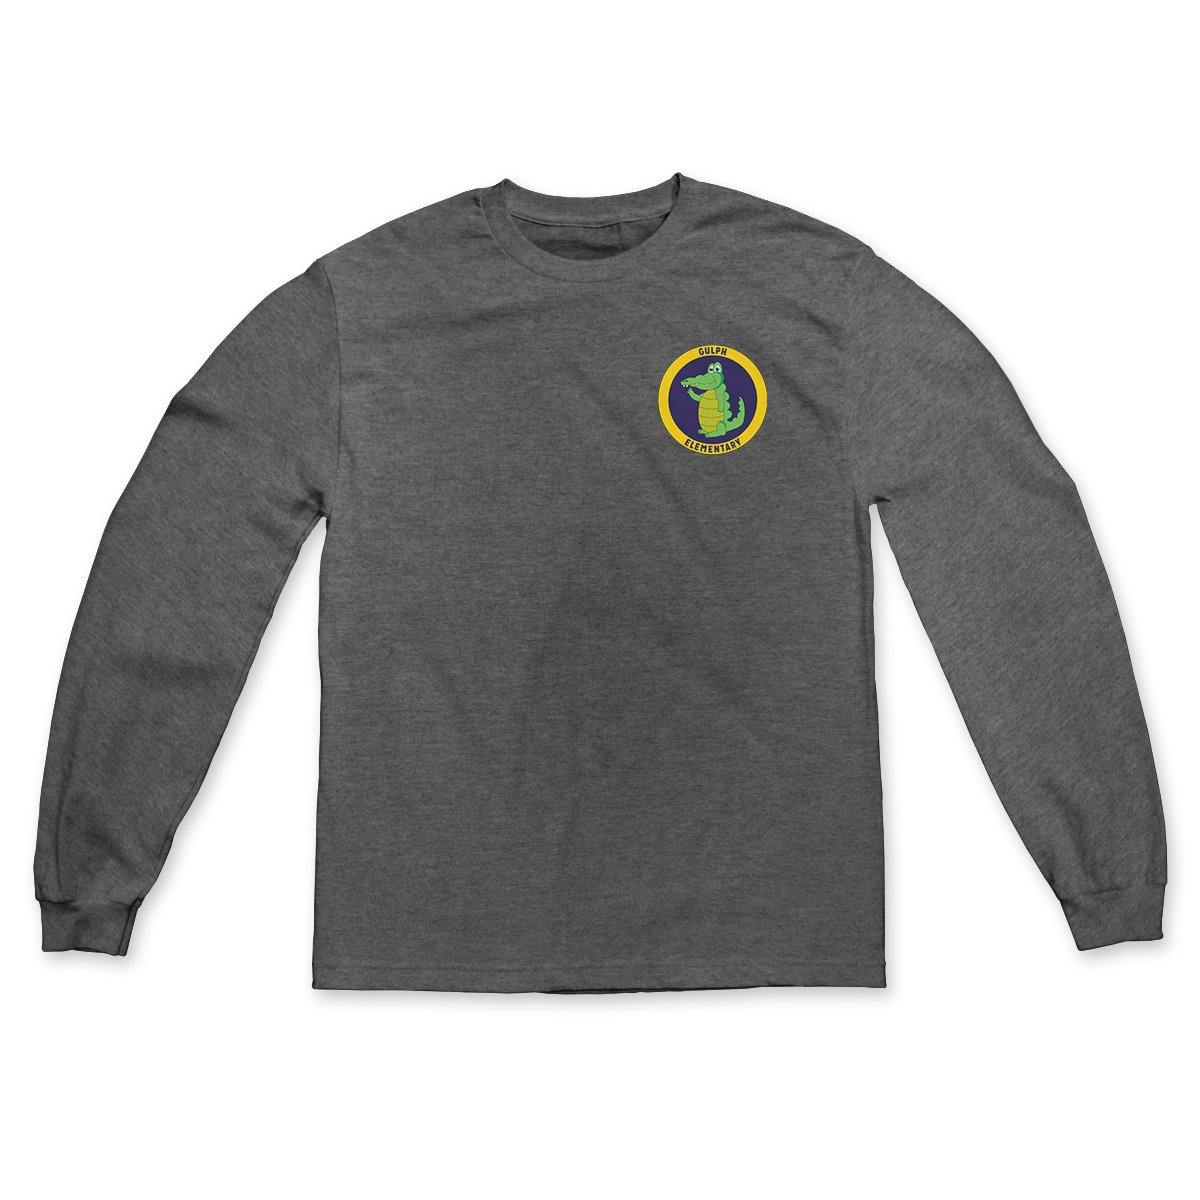 Buy Now – Gulph Elementary School "Full Color Logo" Long Sleeve – Philly & Sports Merch – Cracked Bell